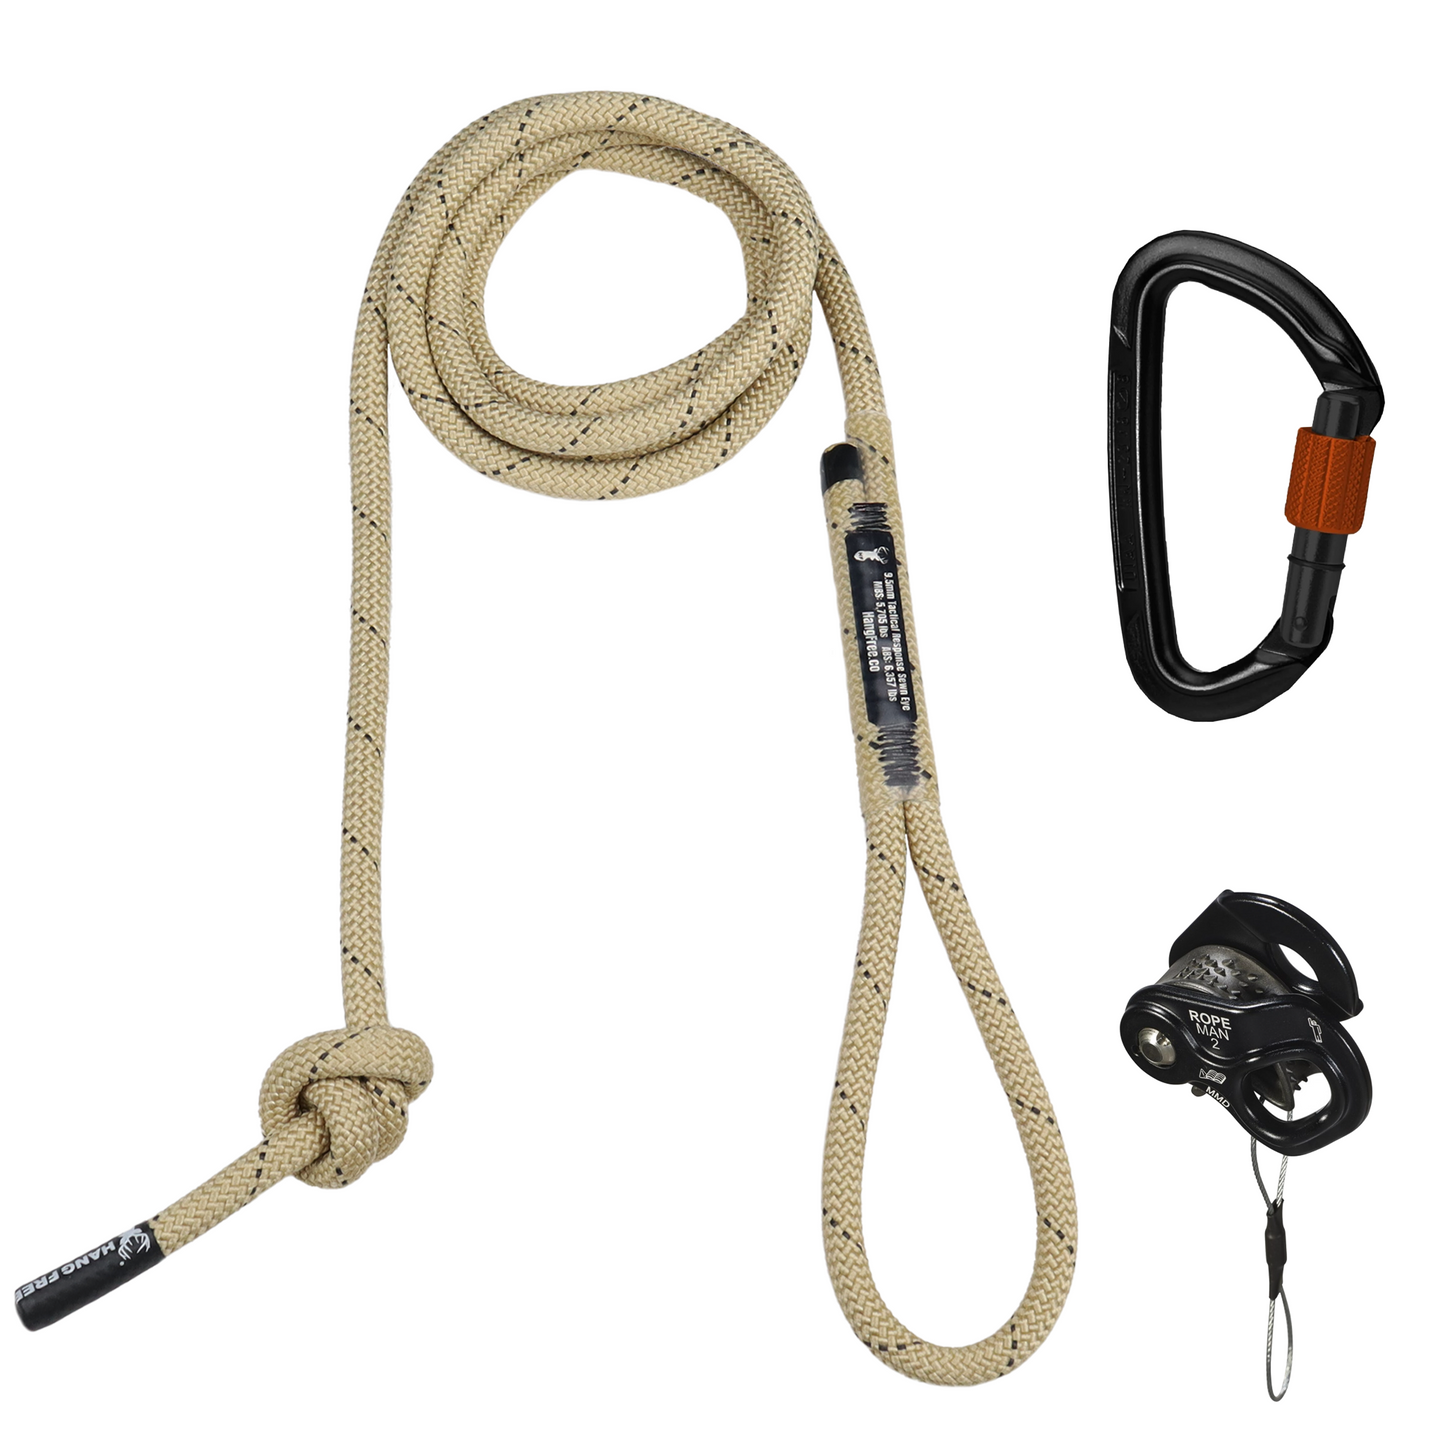 9.5mm Tac Res Deluxe Sewn Tether & Lineman's with Ropeman 2 & Carabiner